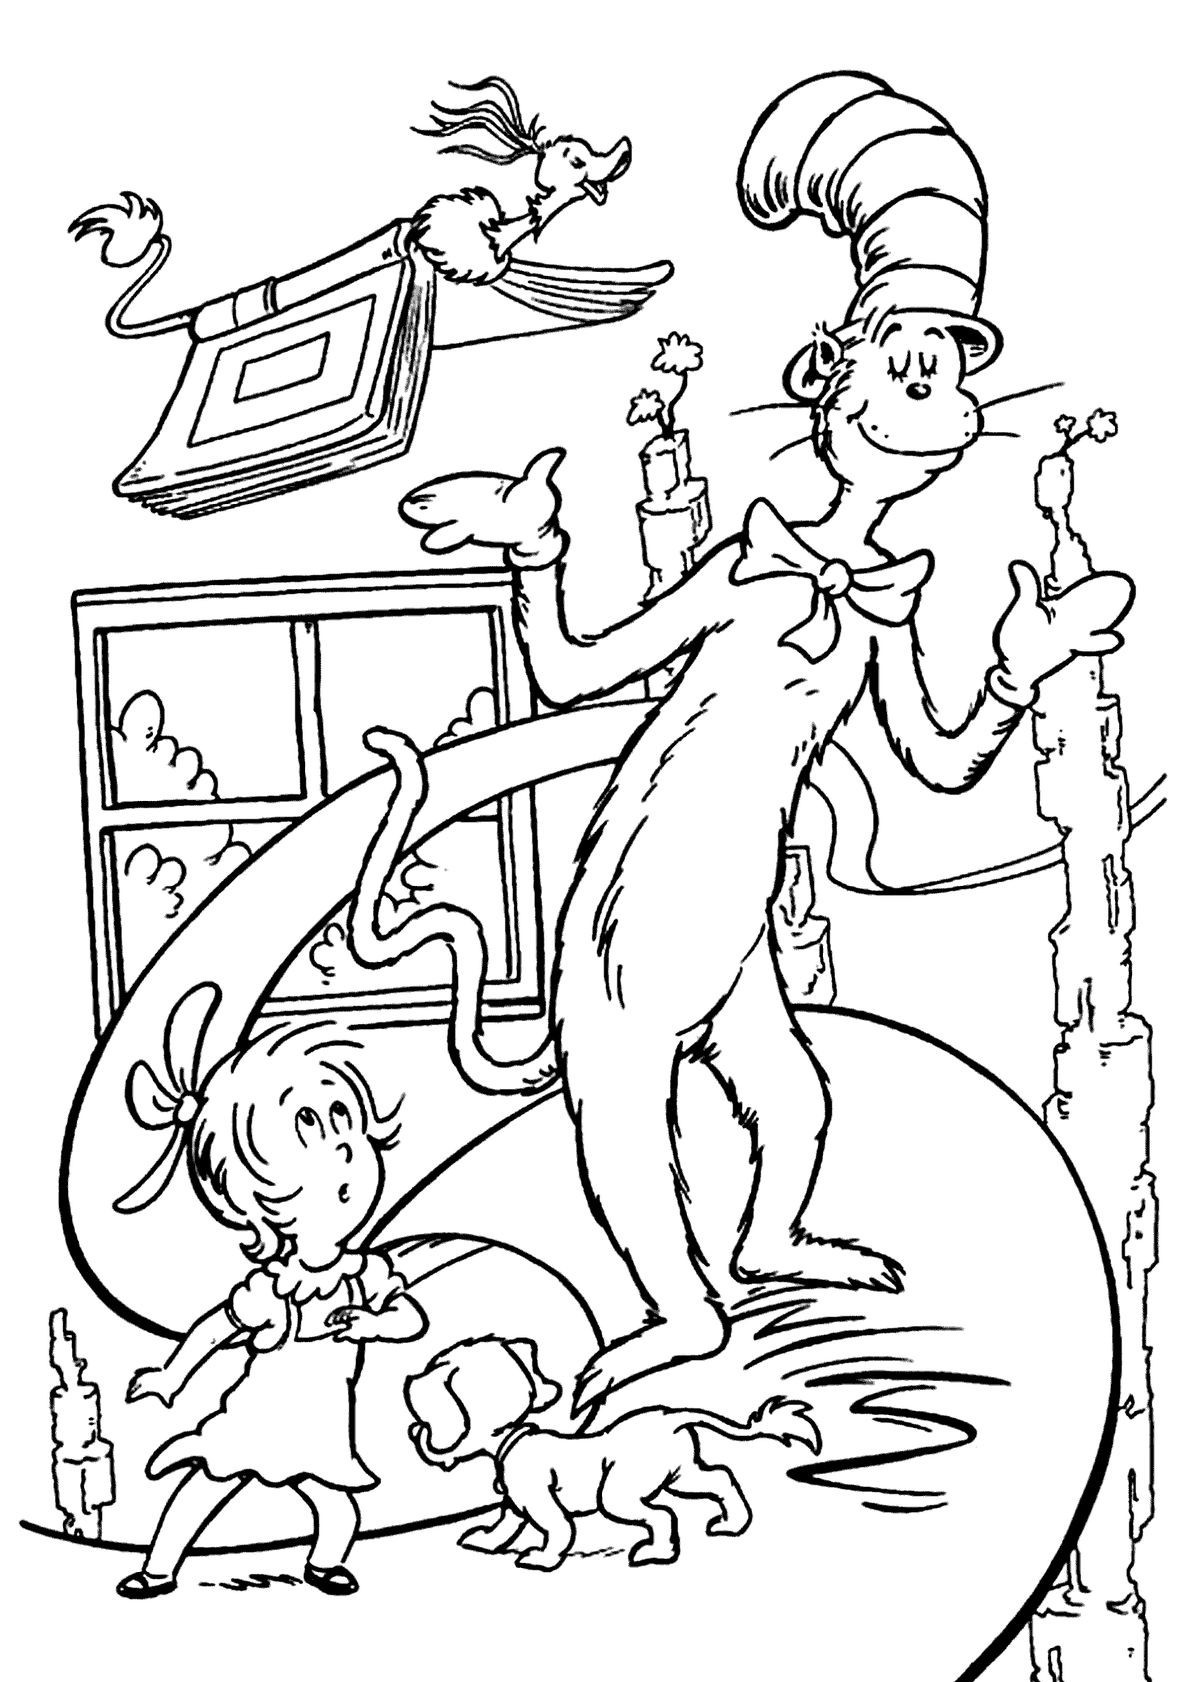 Dr Seuss Birthday Coloring Pages at GetDrawings Free download